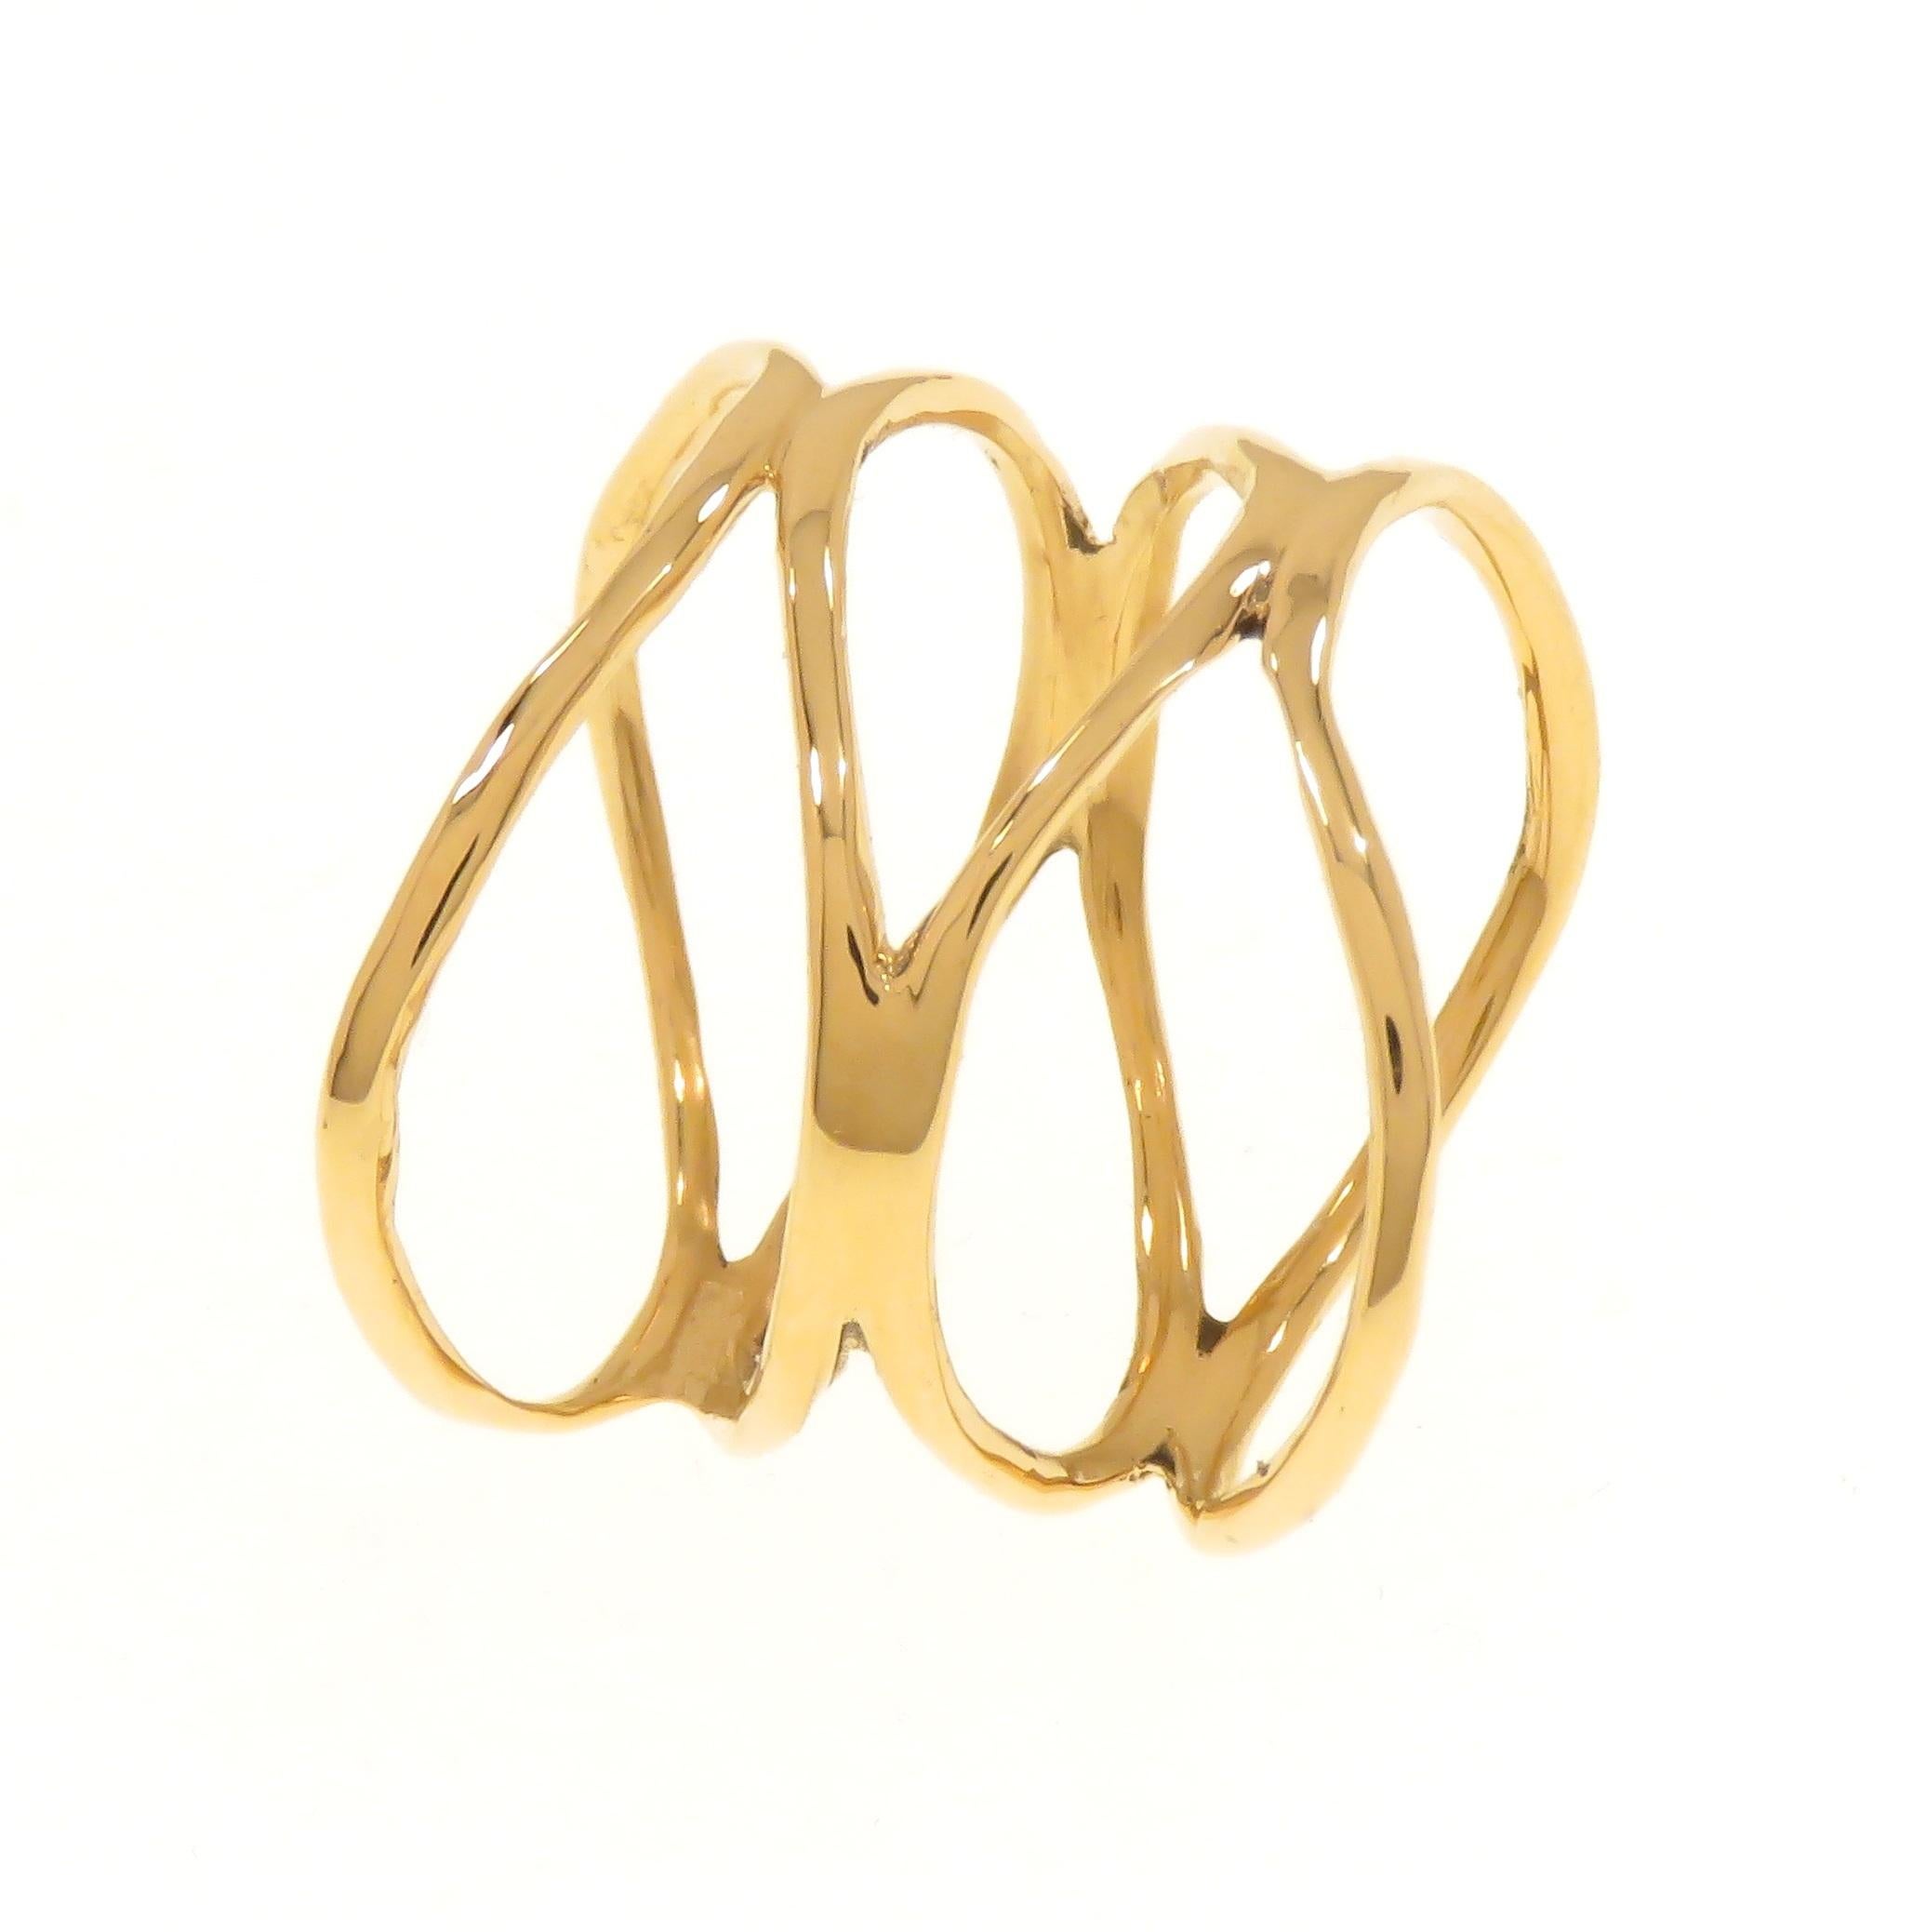 This sinuous and classy ring handmade in 9 karat rose gold is perfect for everyday wear. US finger size: 6, Italian finger size: 12, French finger size: 52. Adjustable to the customer's size. Marked with the Italian Gold Mark 375 and Botta Gioielli